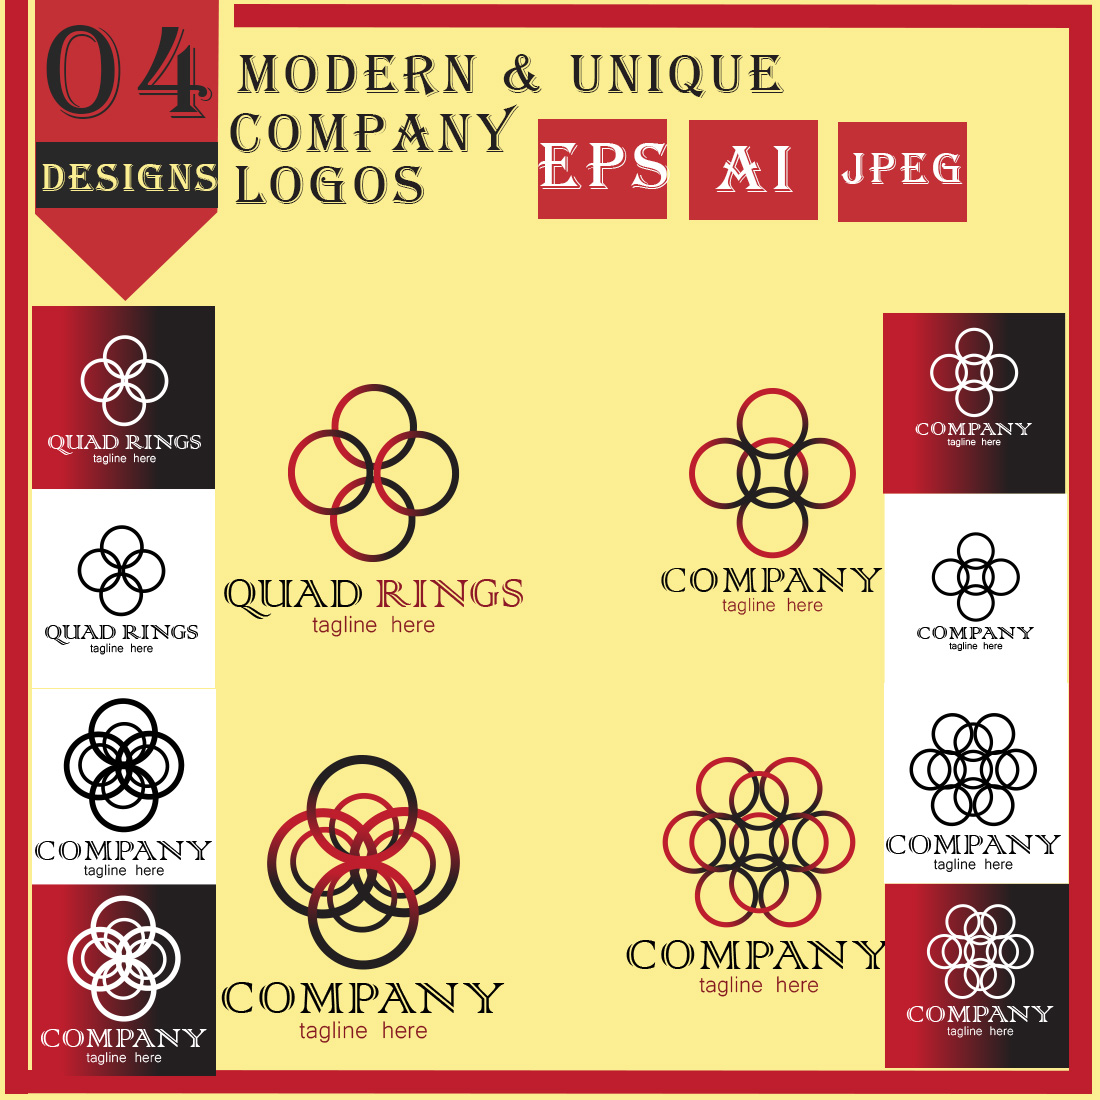 Modern & Unique Company Logos (4 Designs) with Black & White version of Logos cover image.